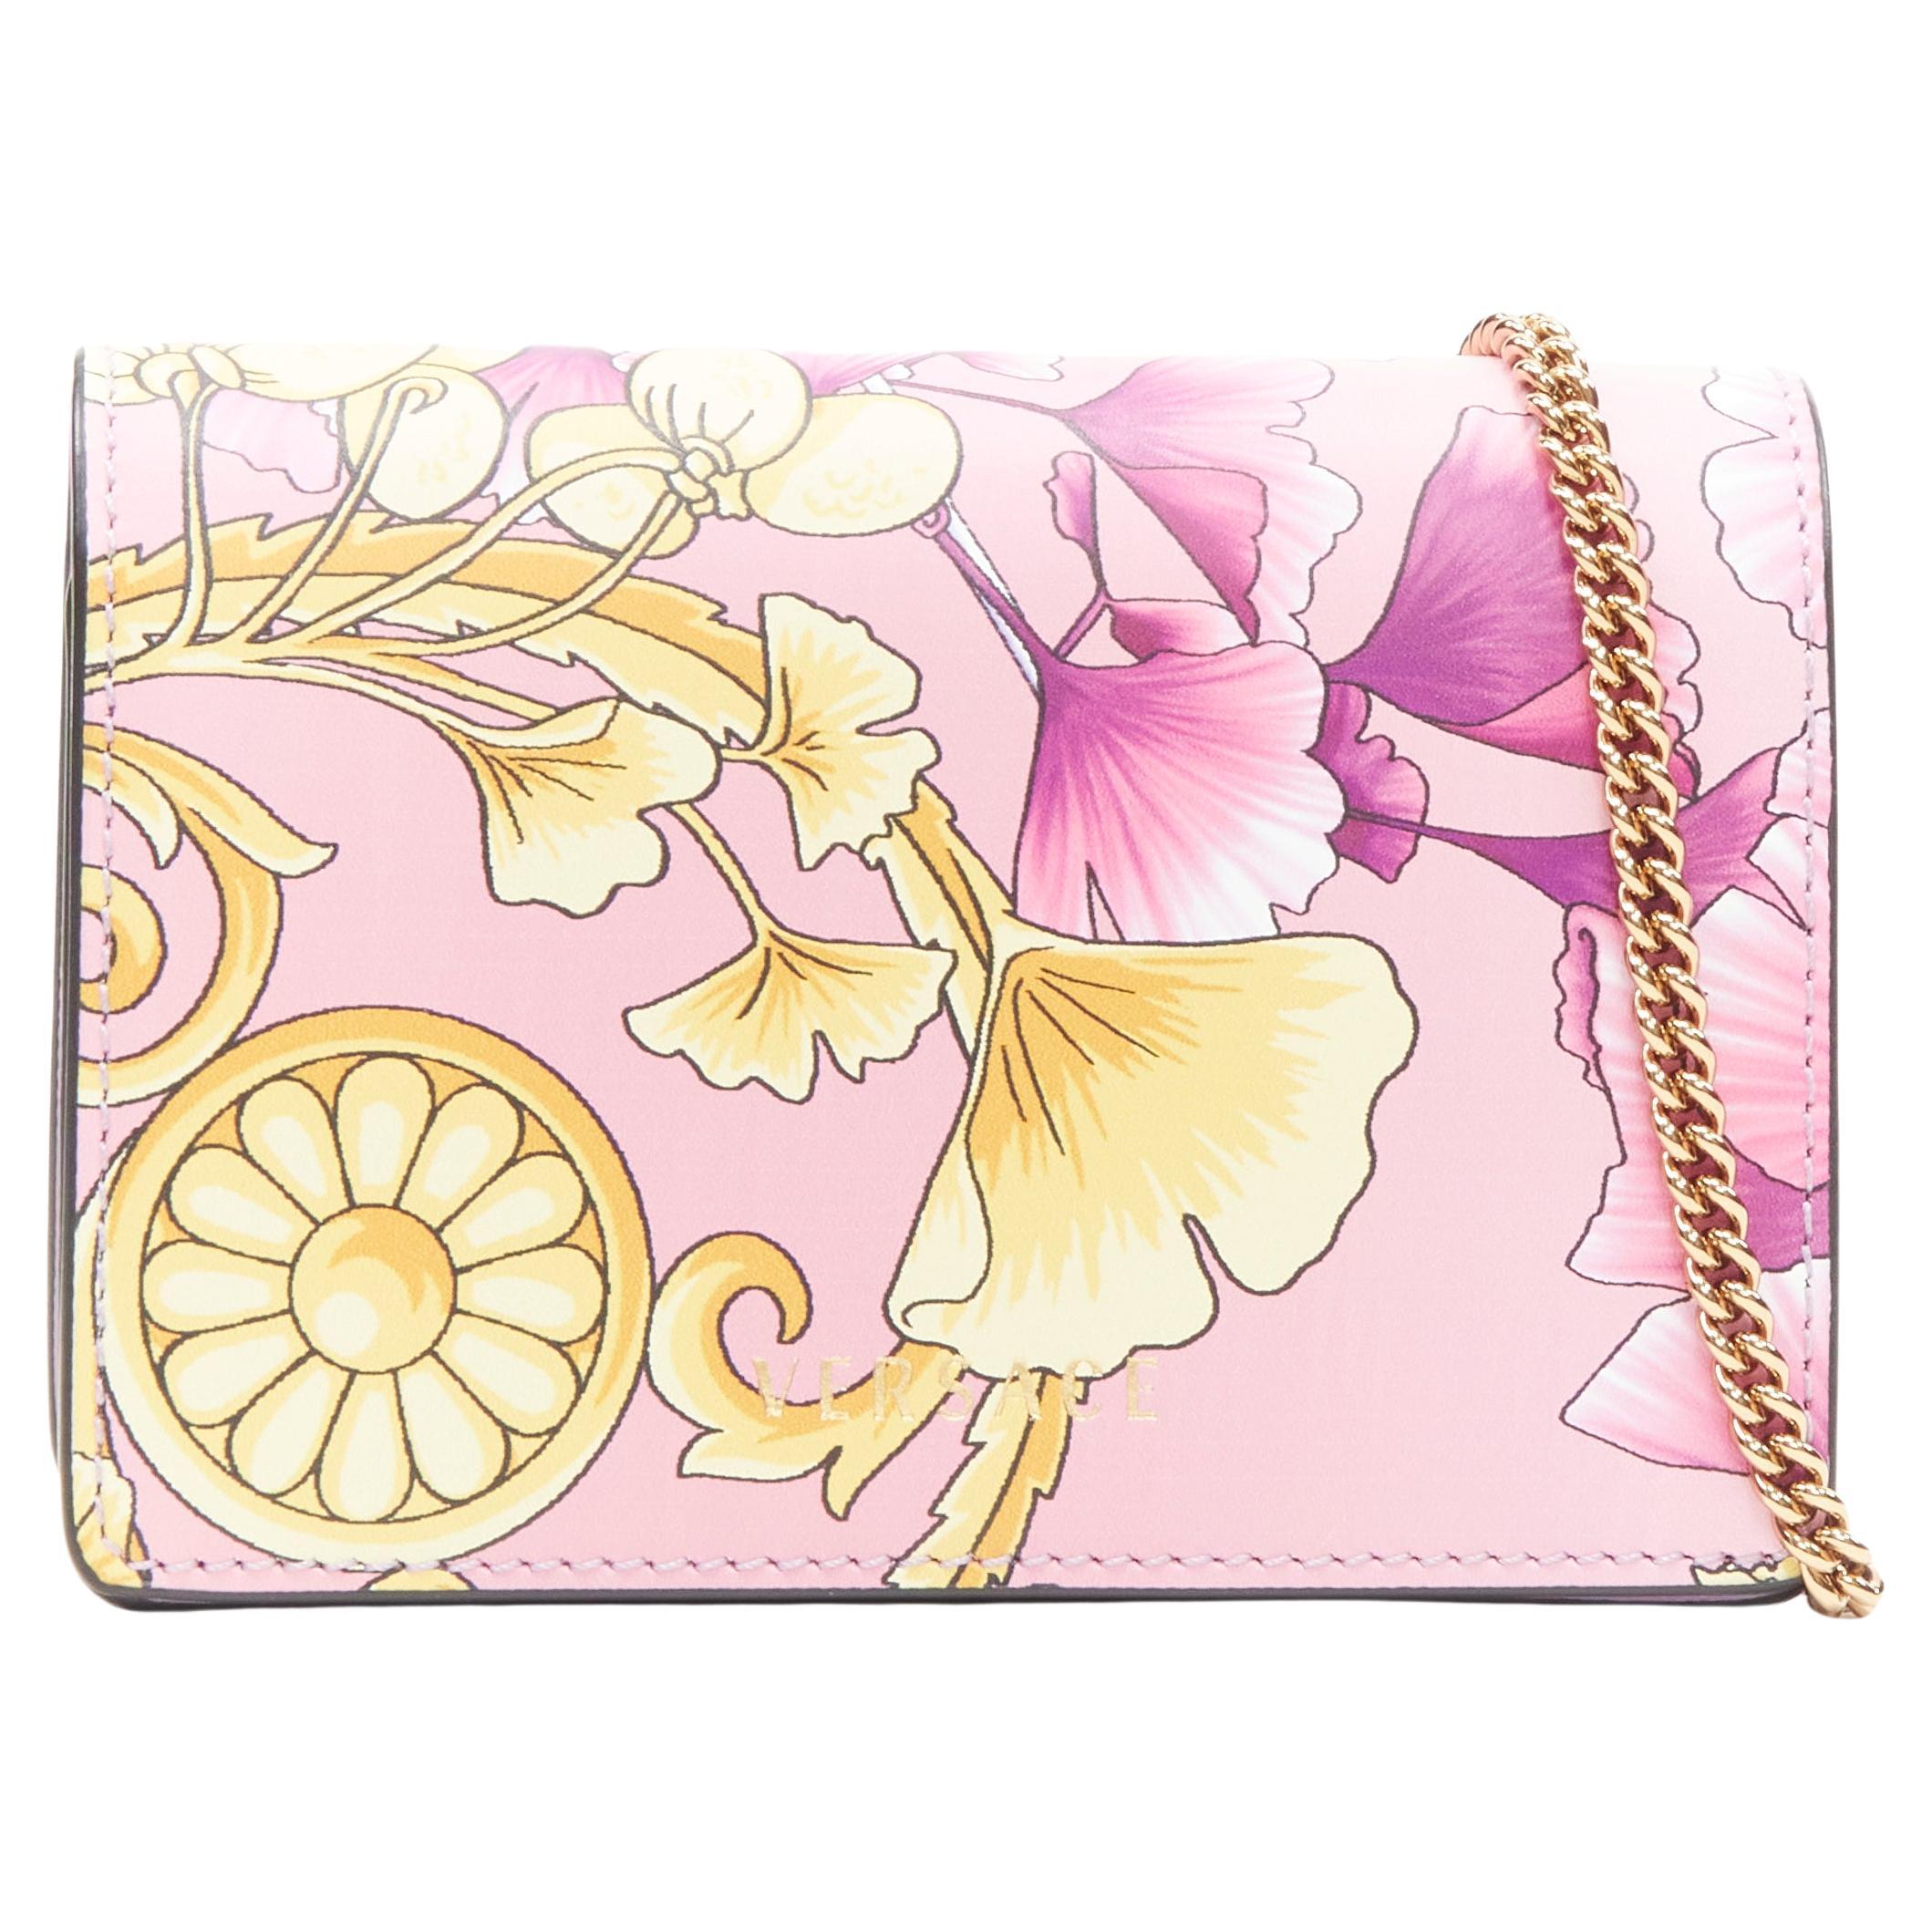 new VERSACE Gingko Barocco pink gold floral leather wallet crossbody micro bag